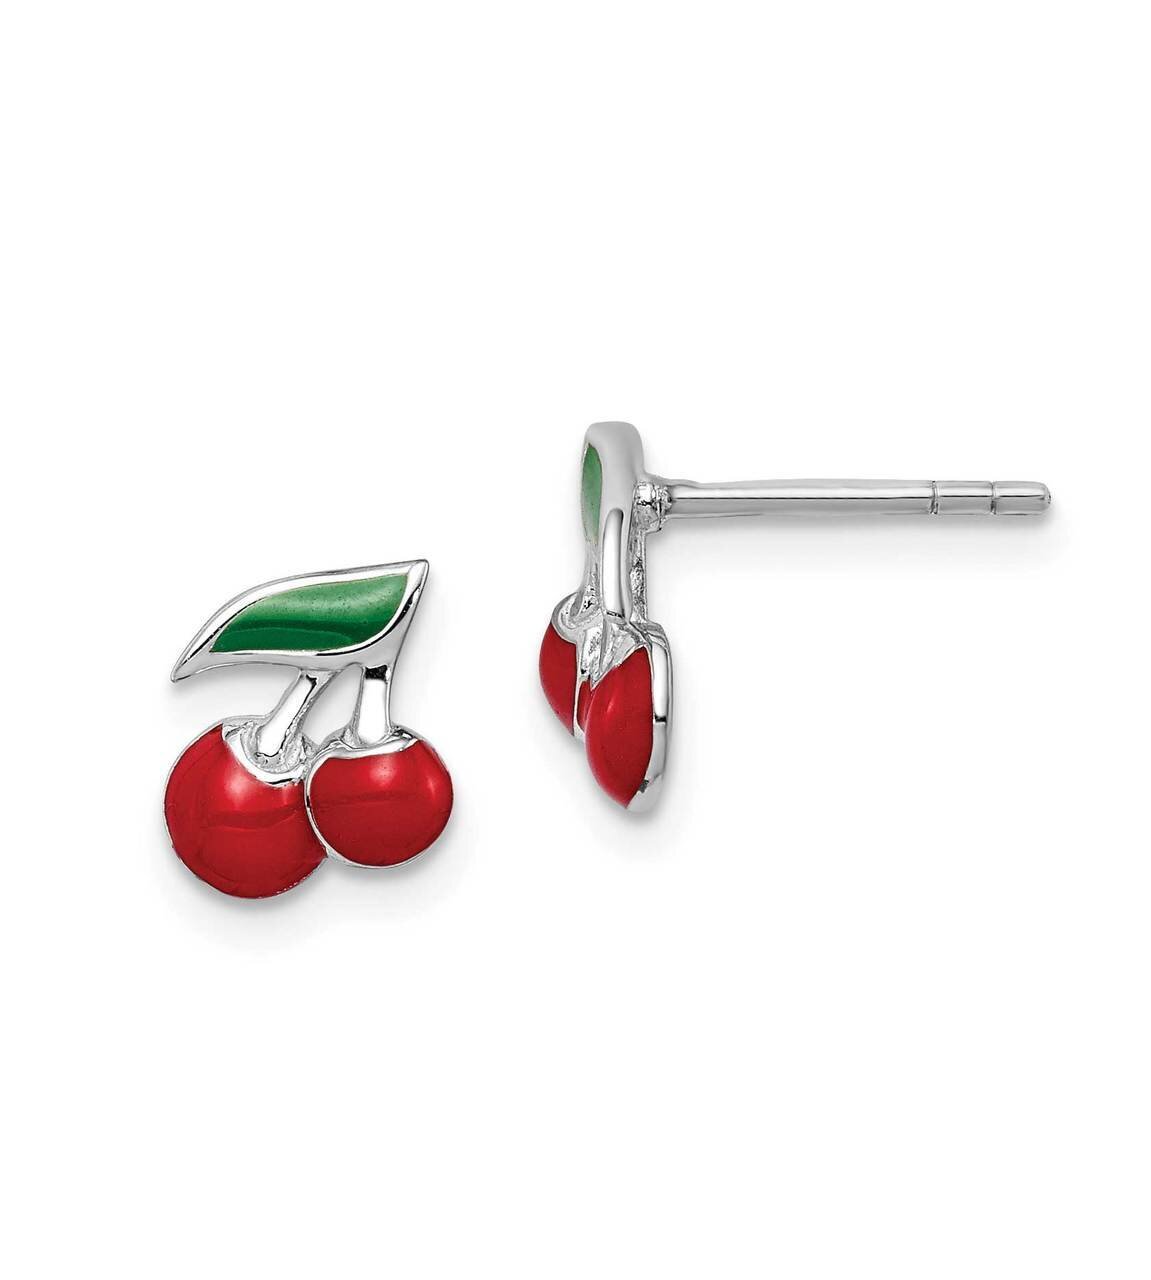 Childs Enameled Cherry Post Earrings Sterling Silver Rhodium-plated QE14332